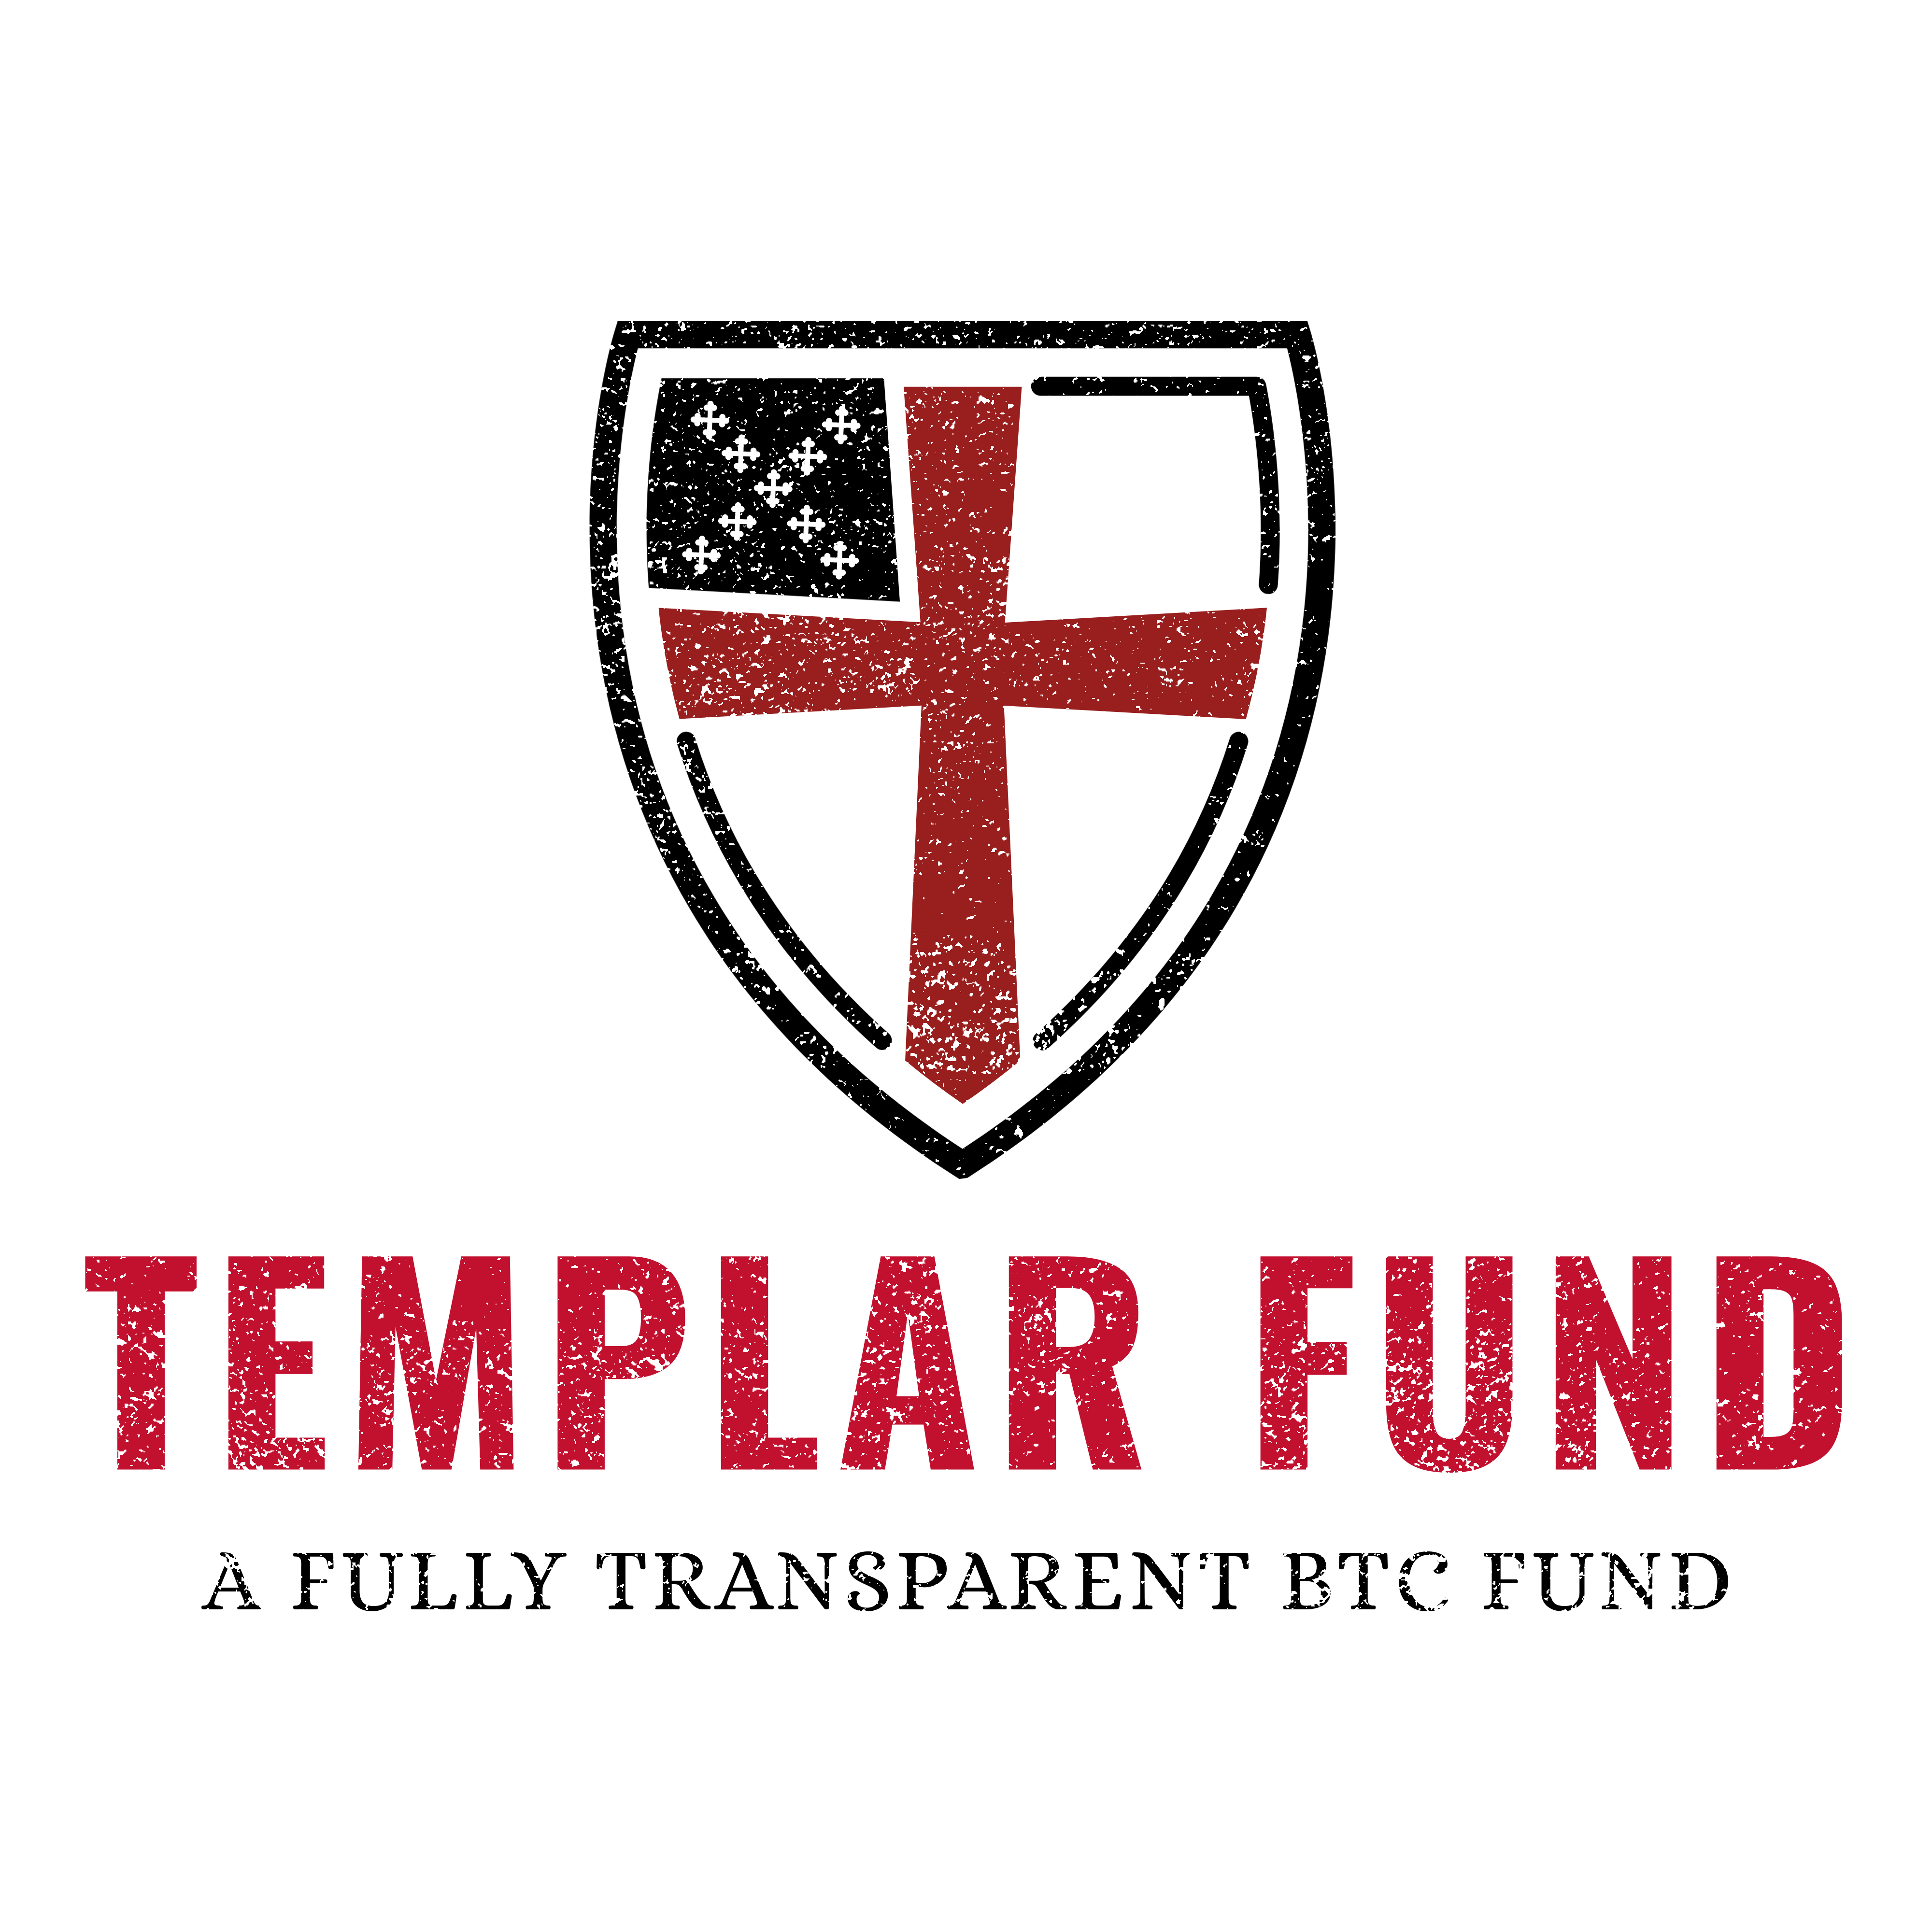 Templar Fund earns 0.227% in Previous 10 Day Trade Period